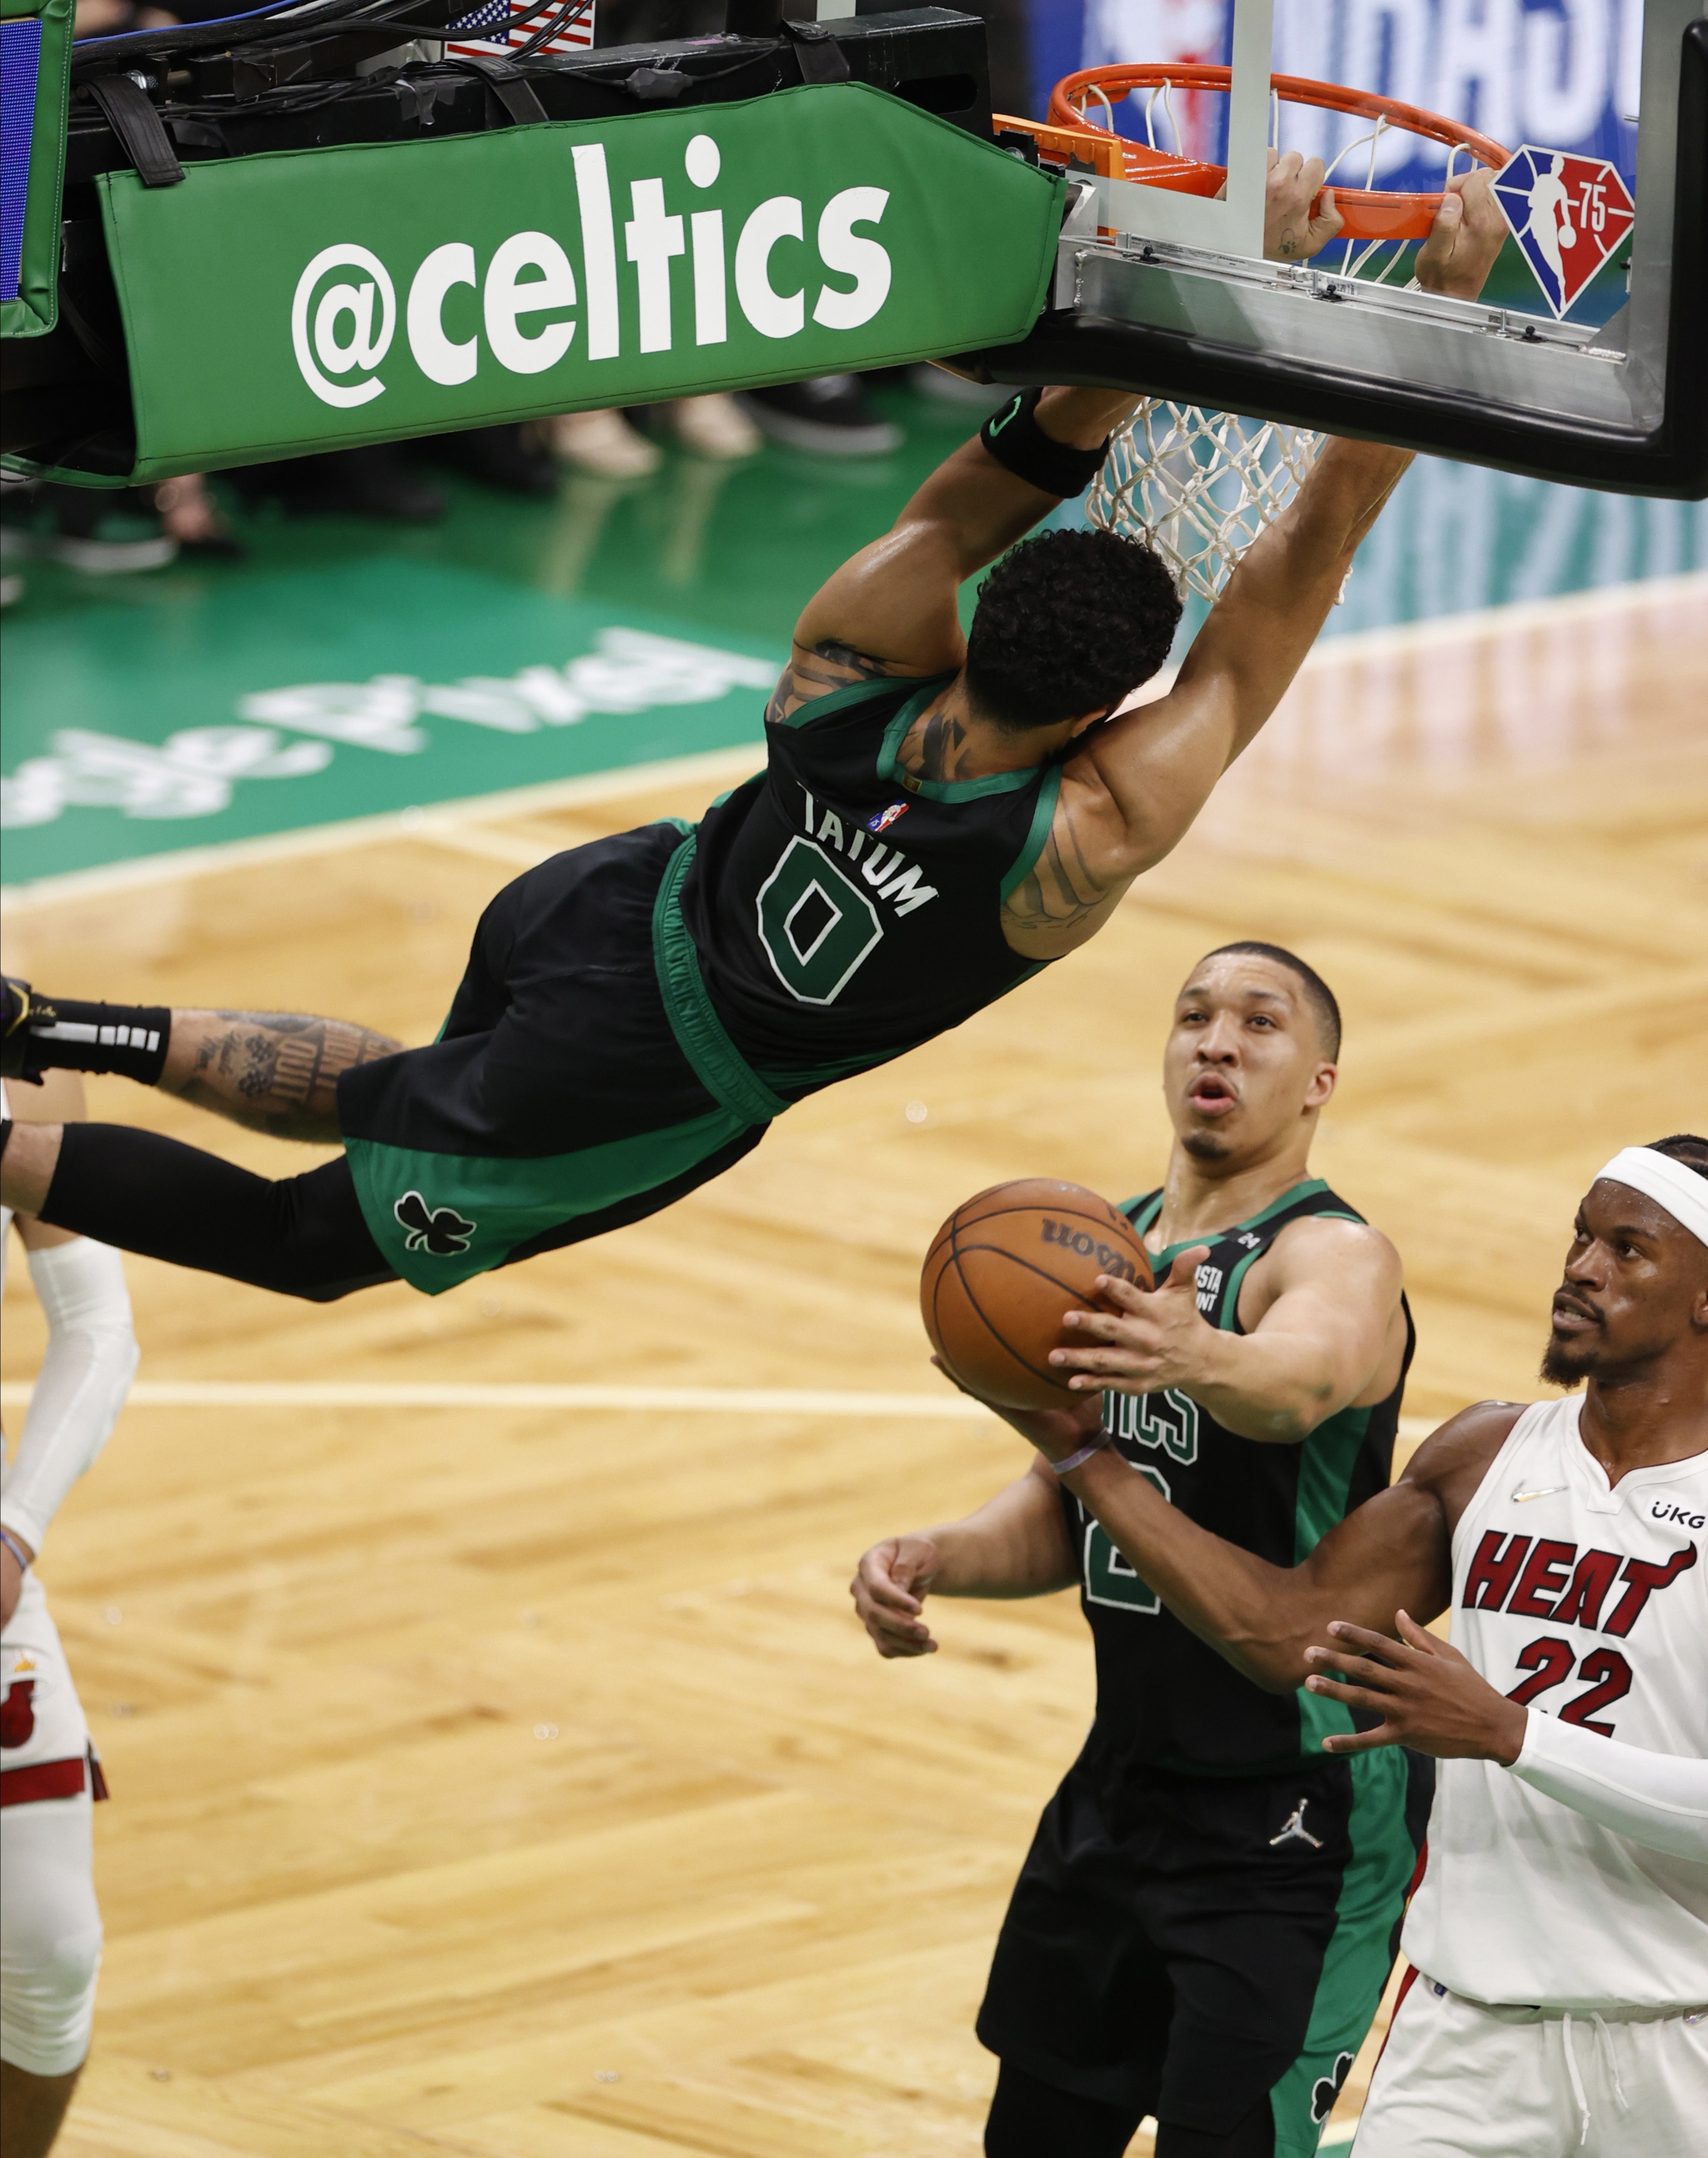 NBA fans reminded of Kobe Bryant by Jayson Tatum's performance against Miami